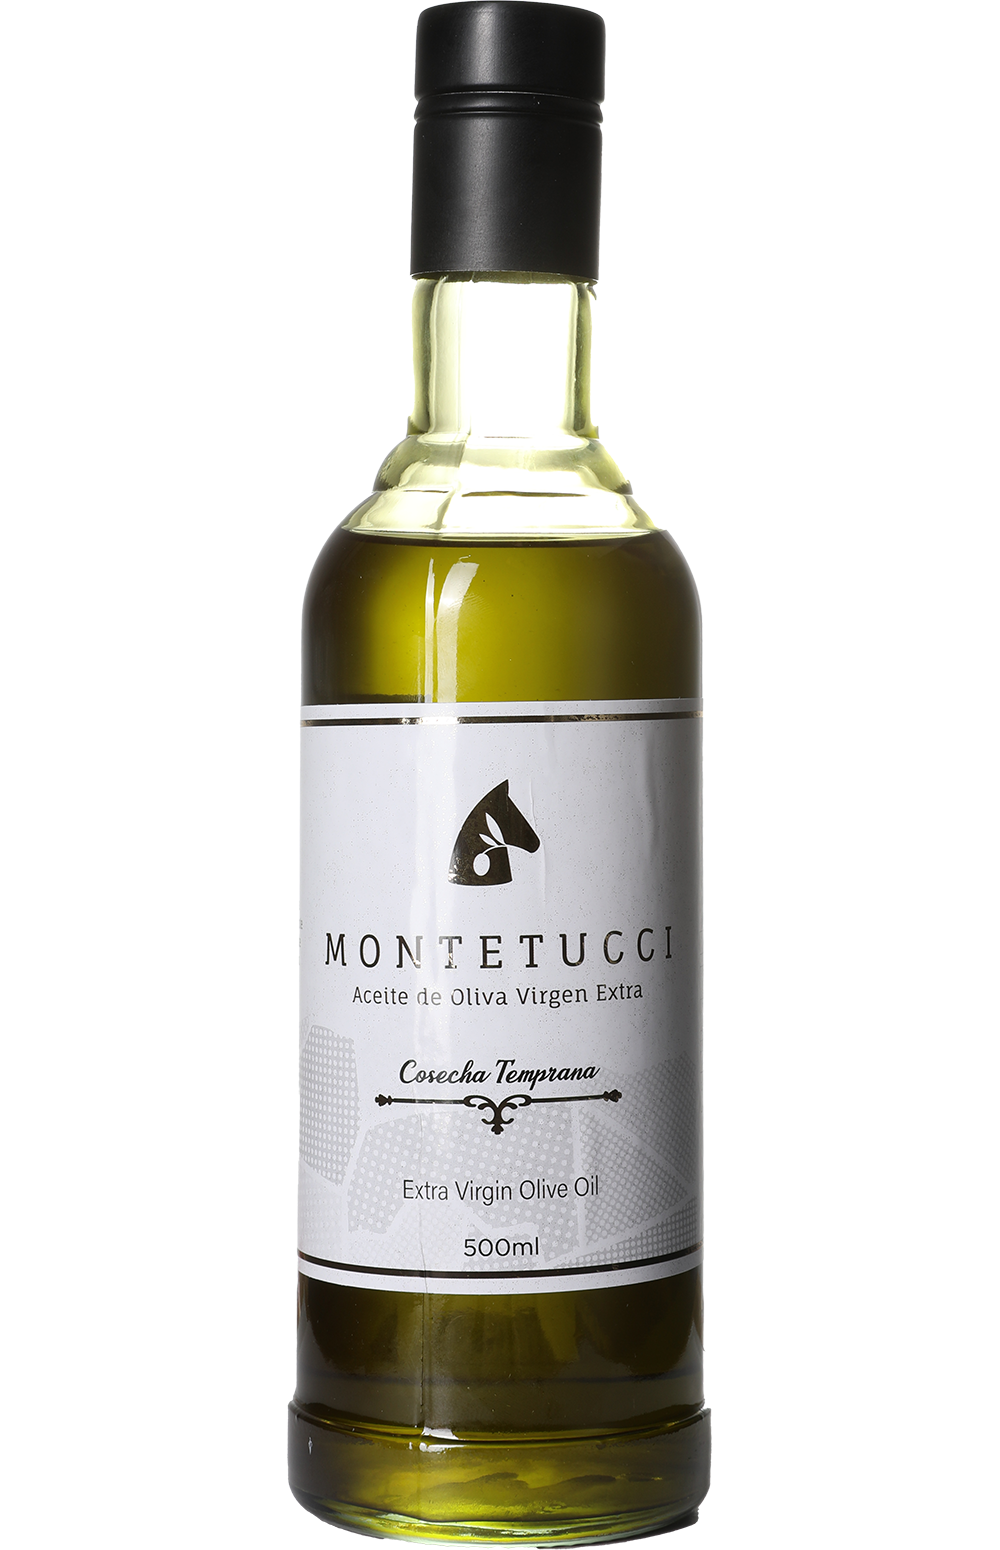 Montetucci Early Harvest